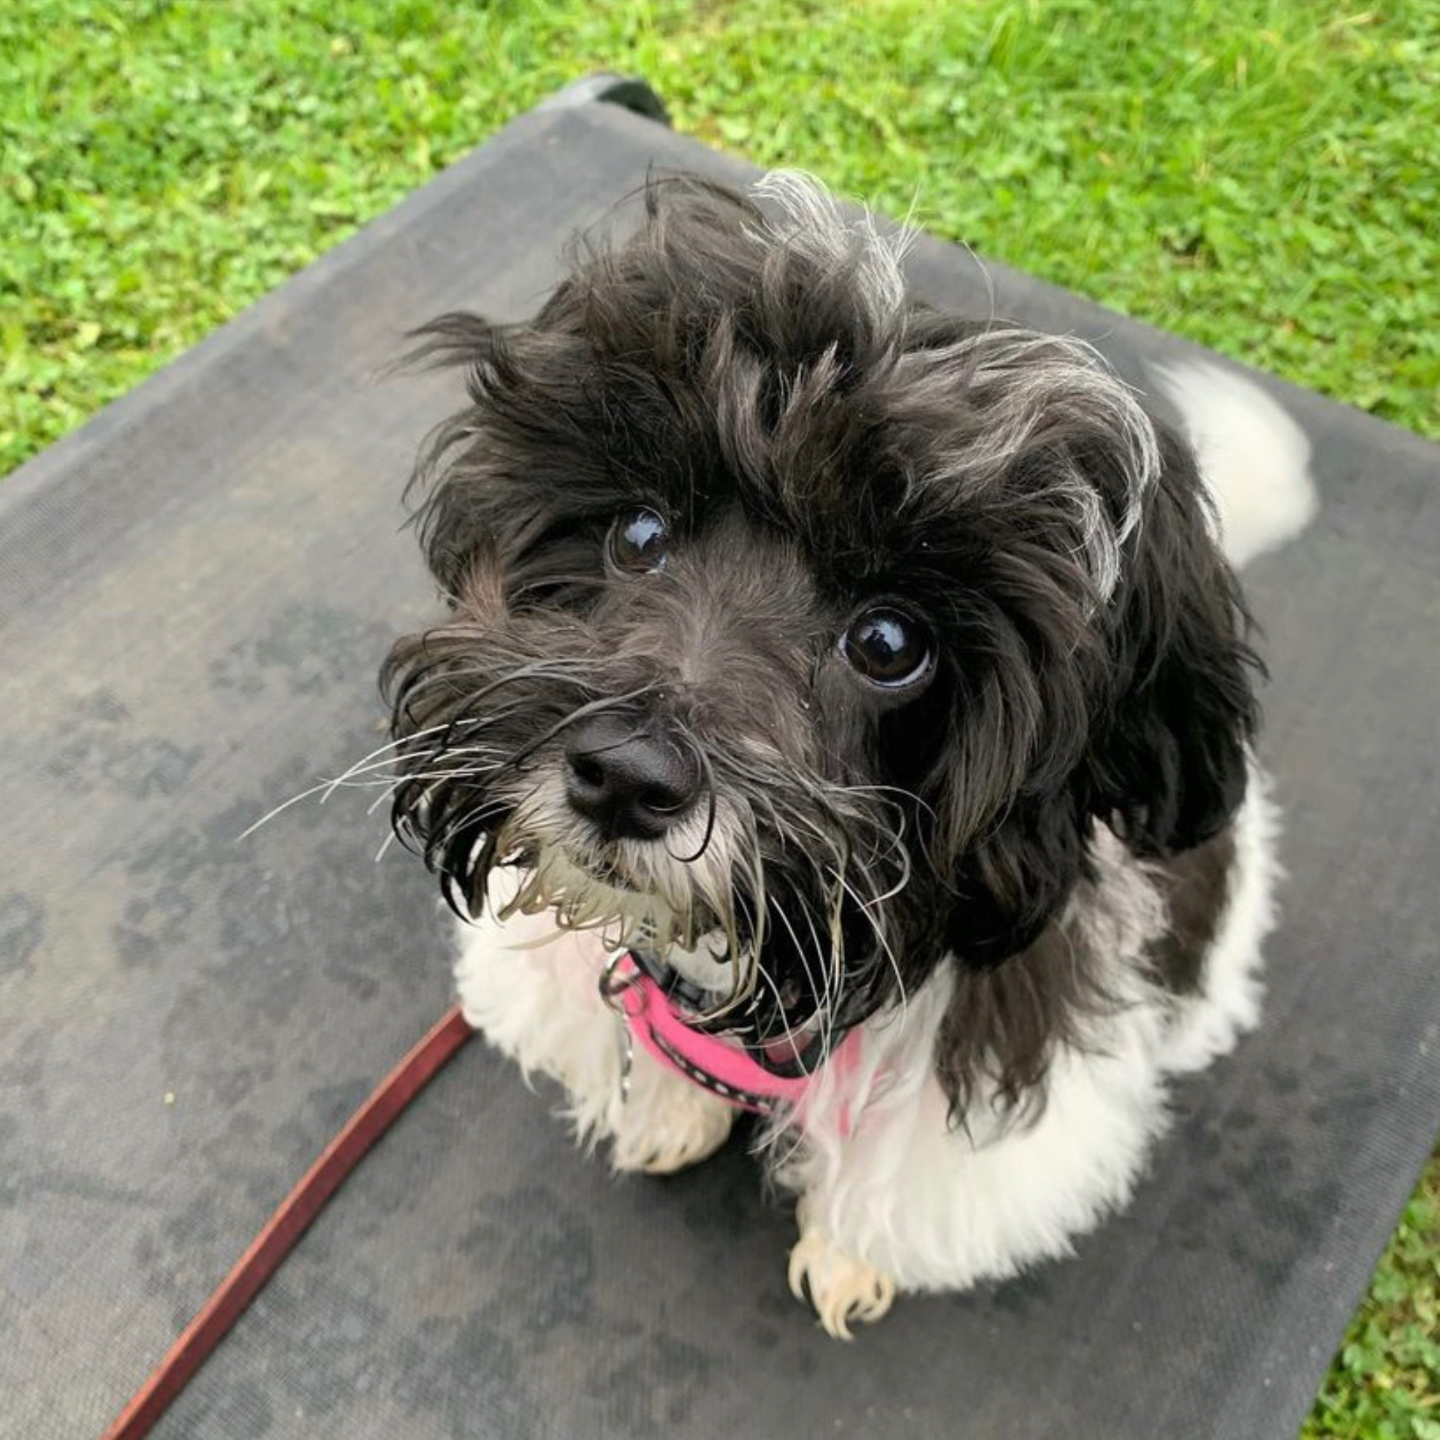 A black and white Maltipoo dog at the park looking at the camera